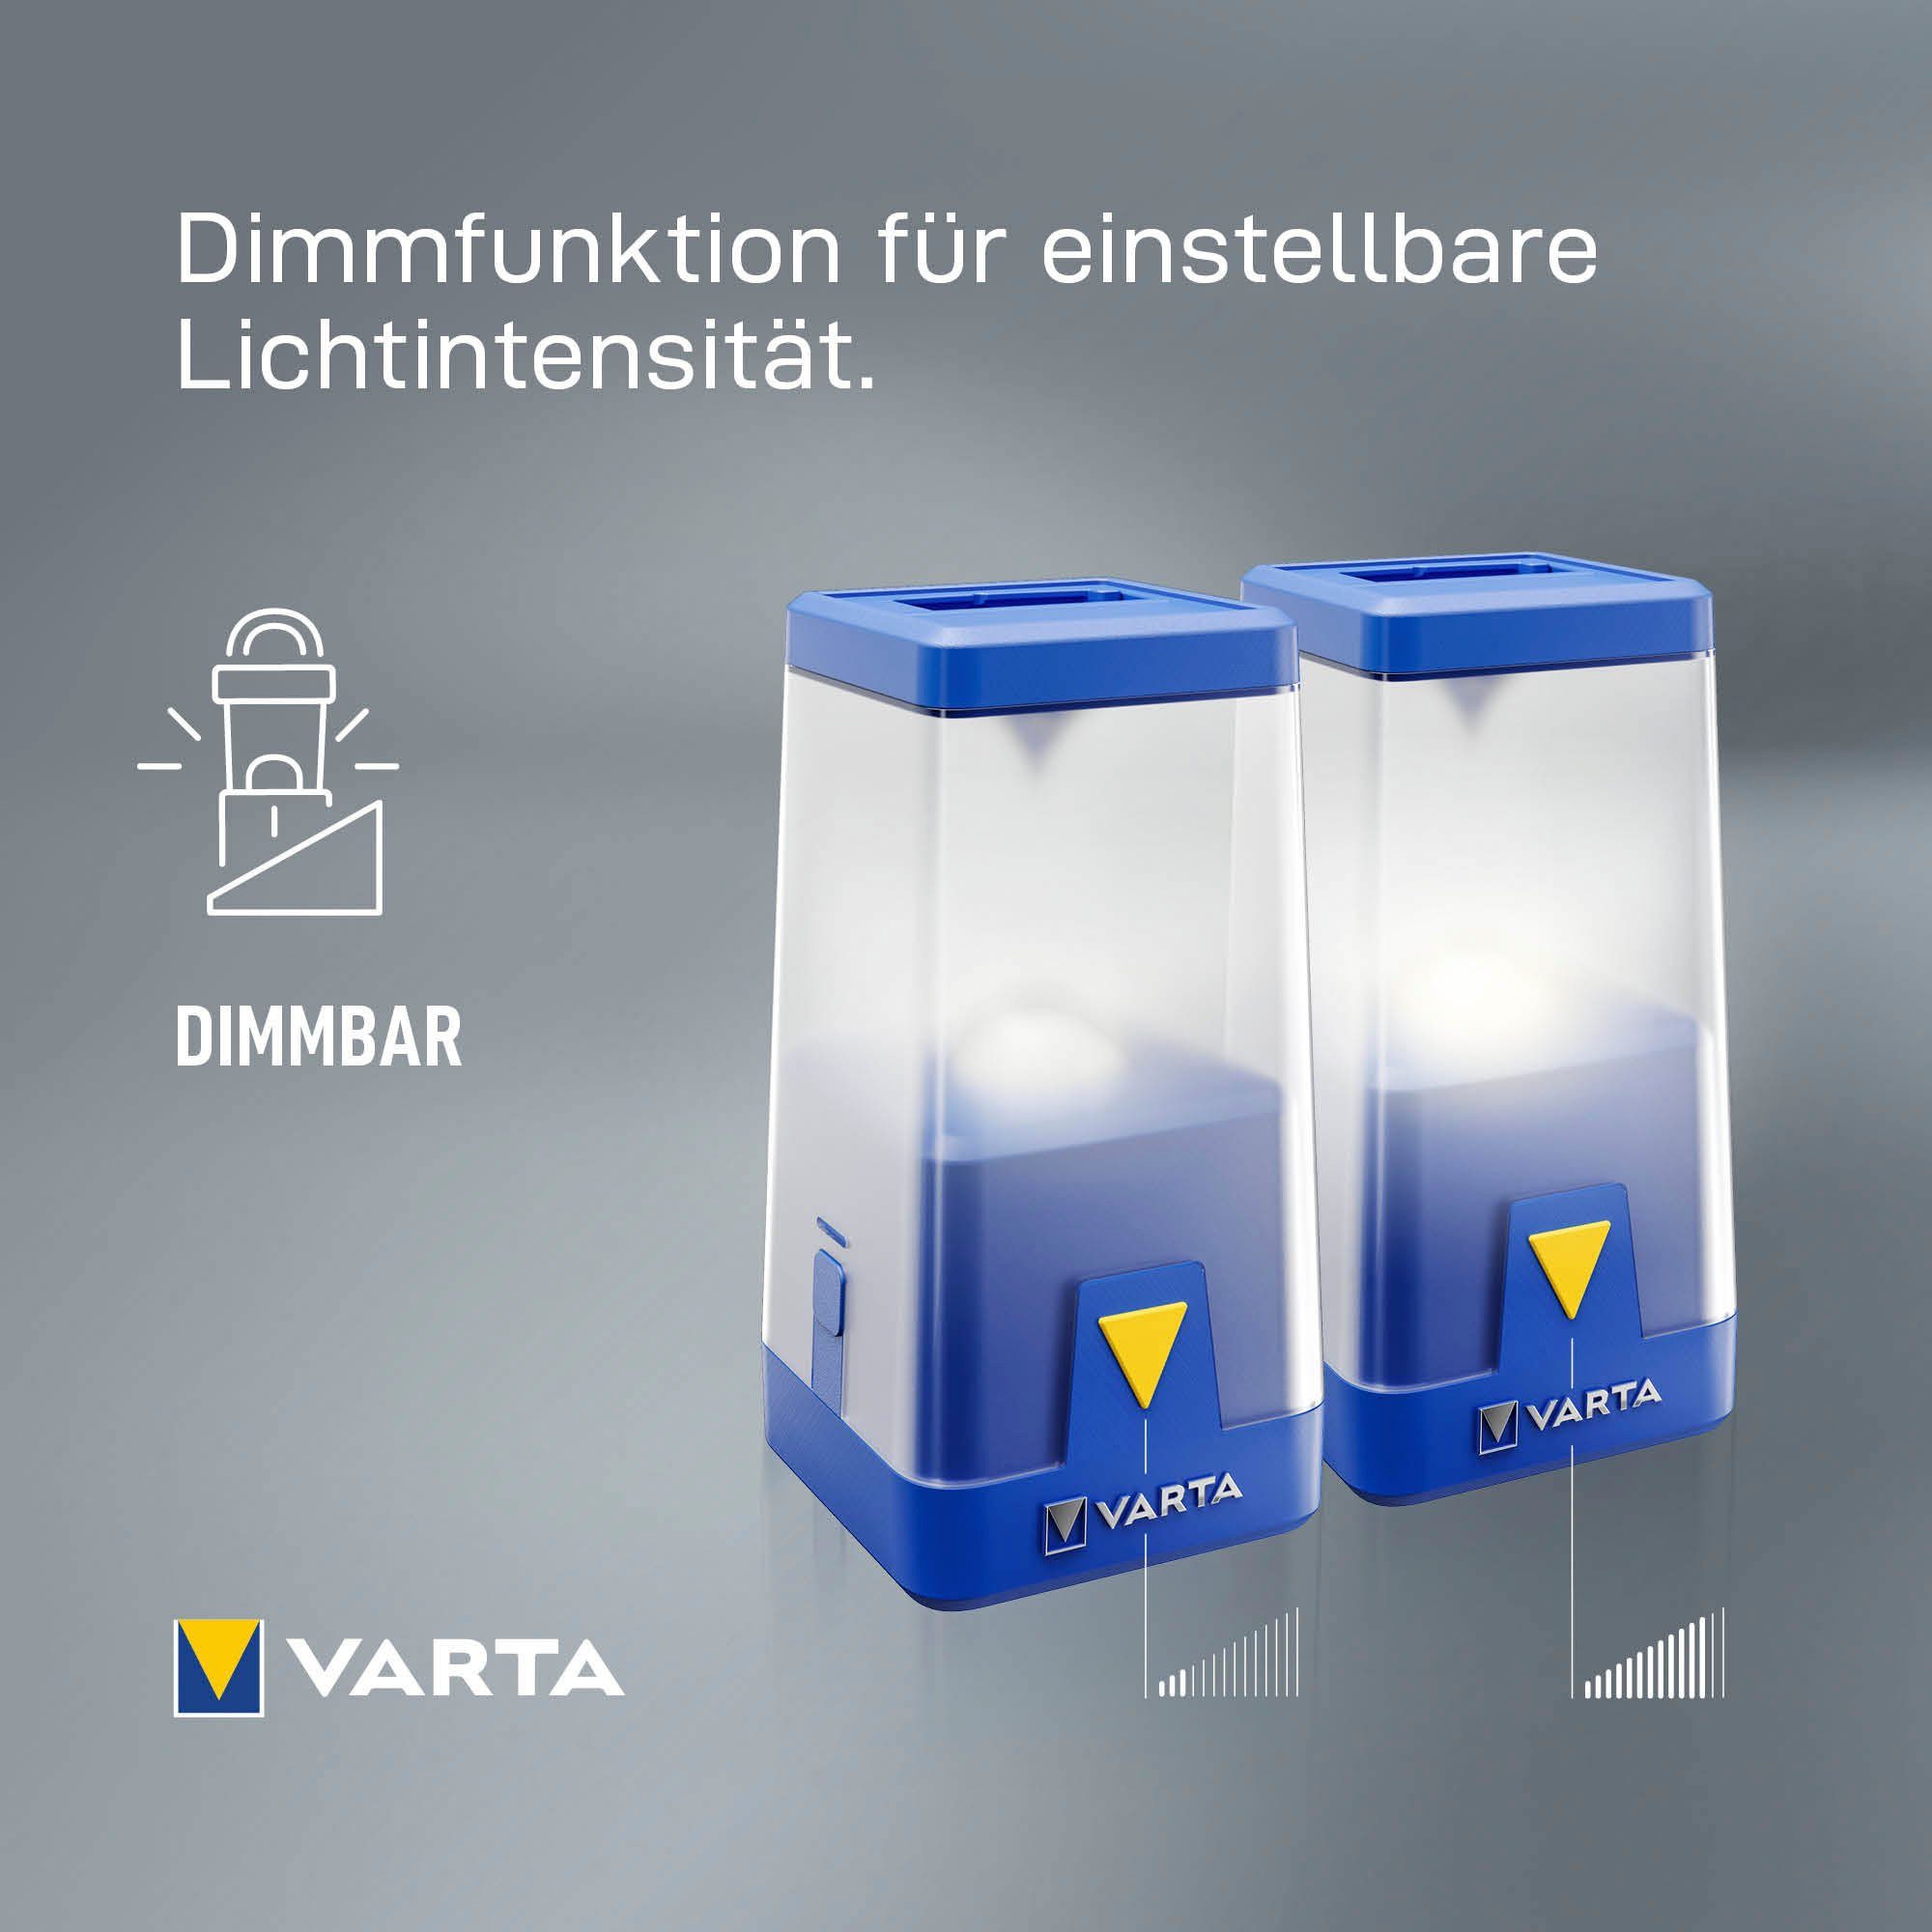 Outdoor Ambiance L20 VARTA Laterne Laterne